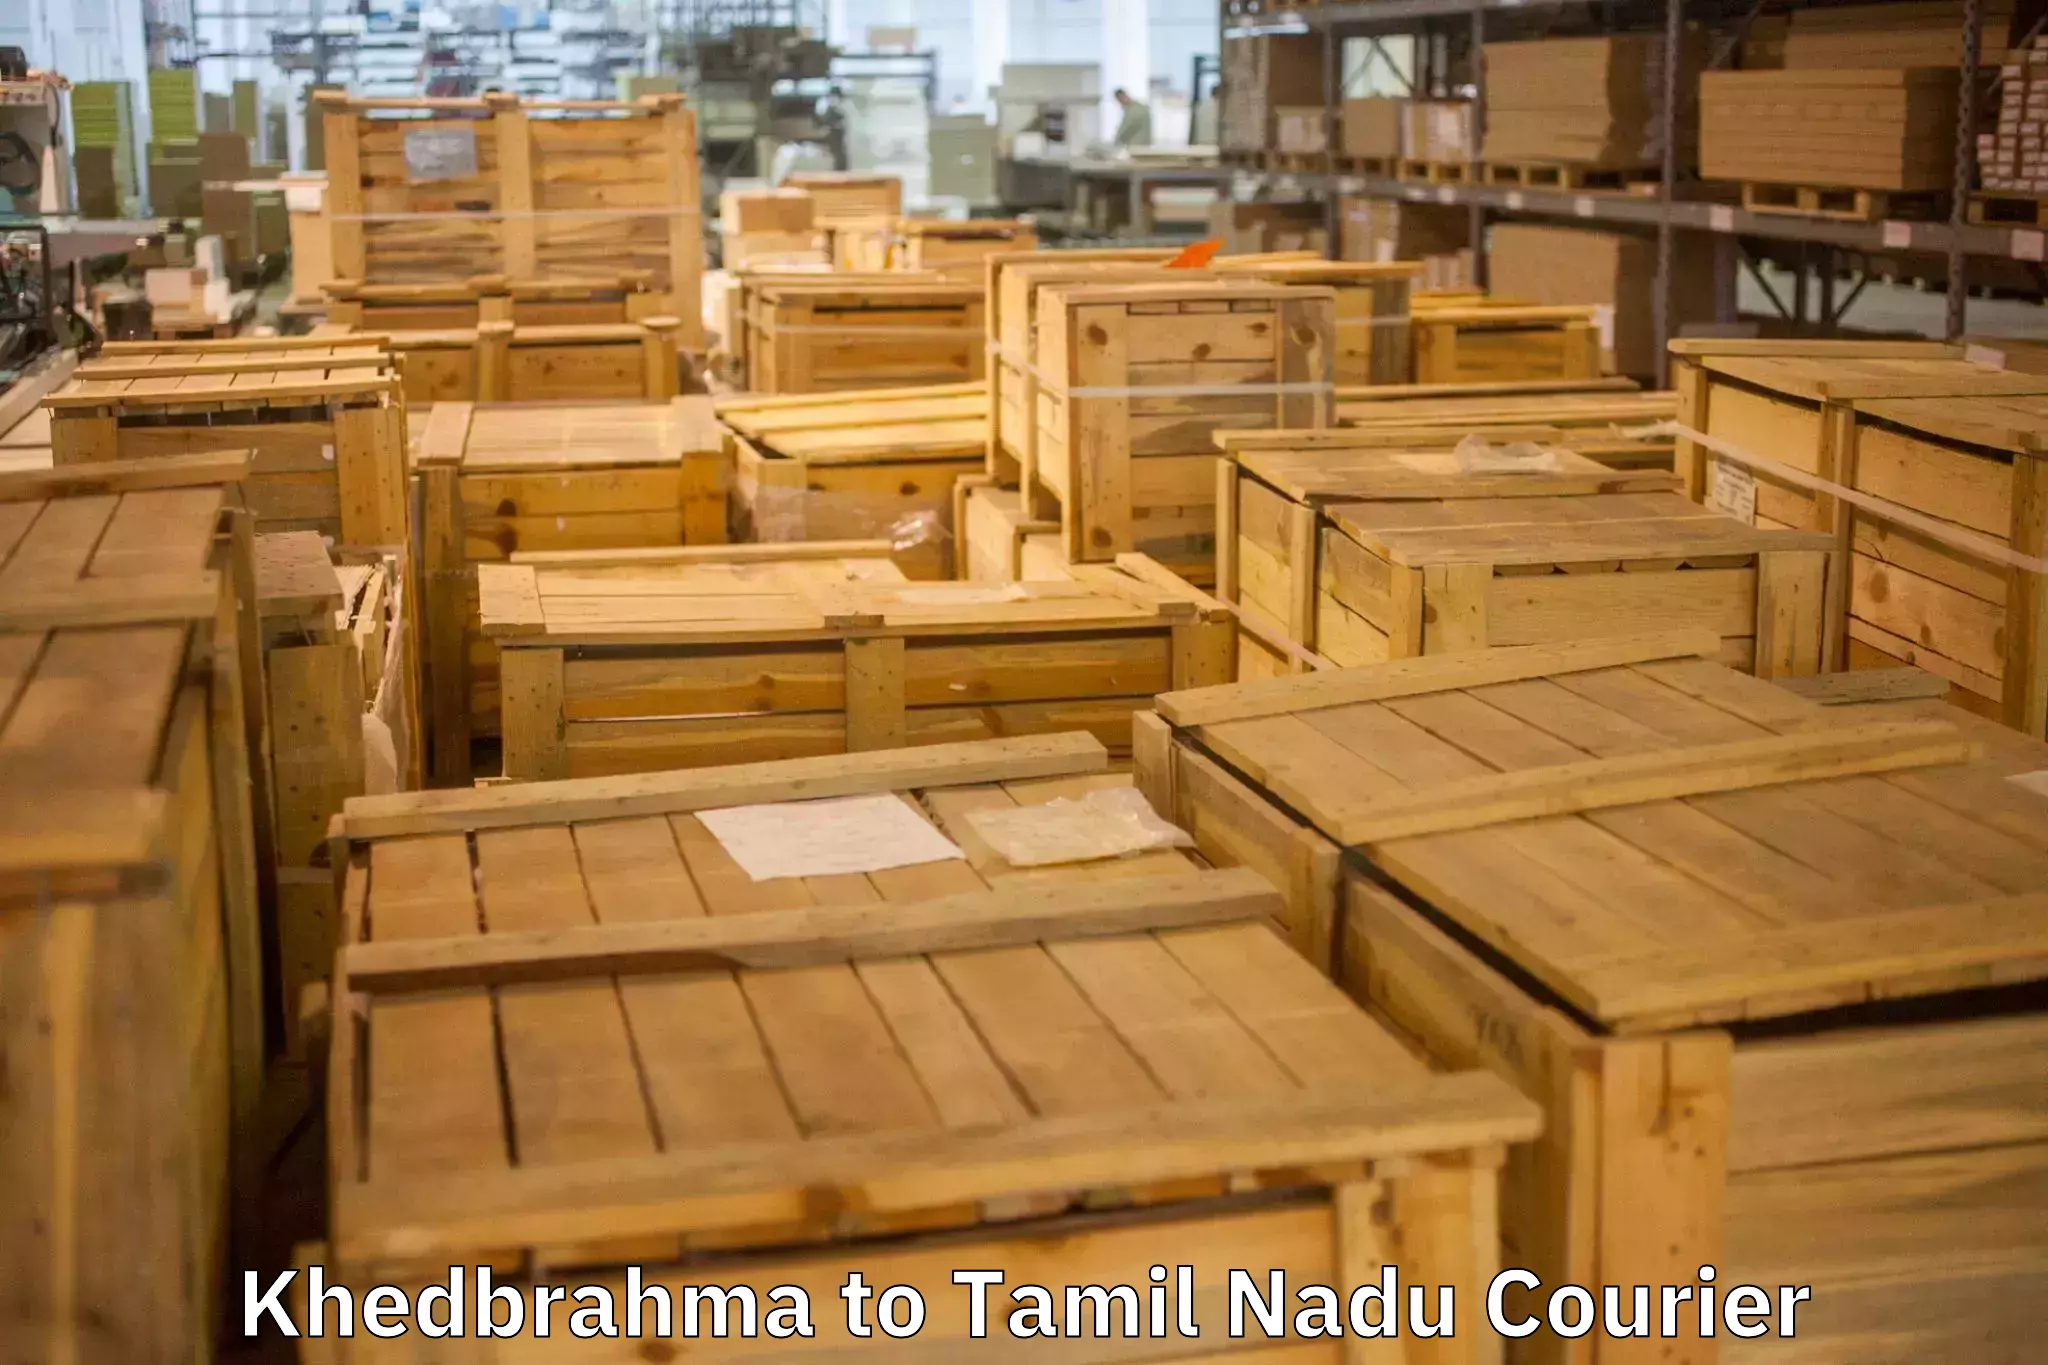 Cost-effective moving options in Khedbrahma to Mylapore